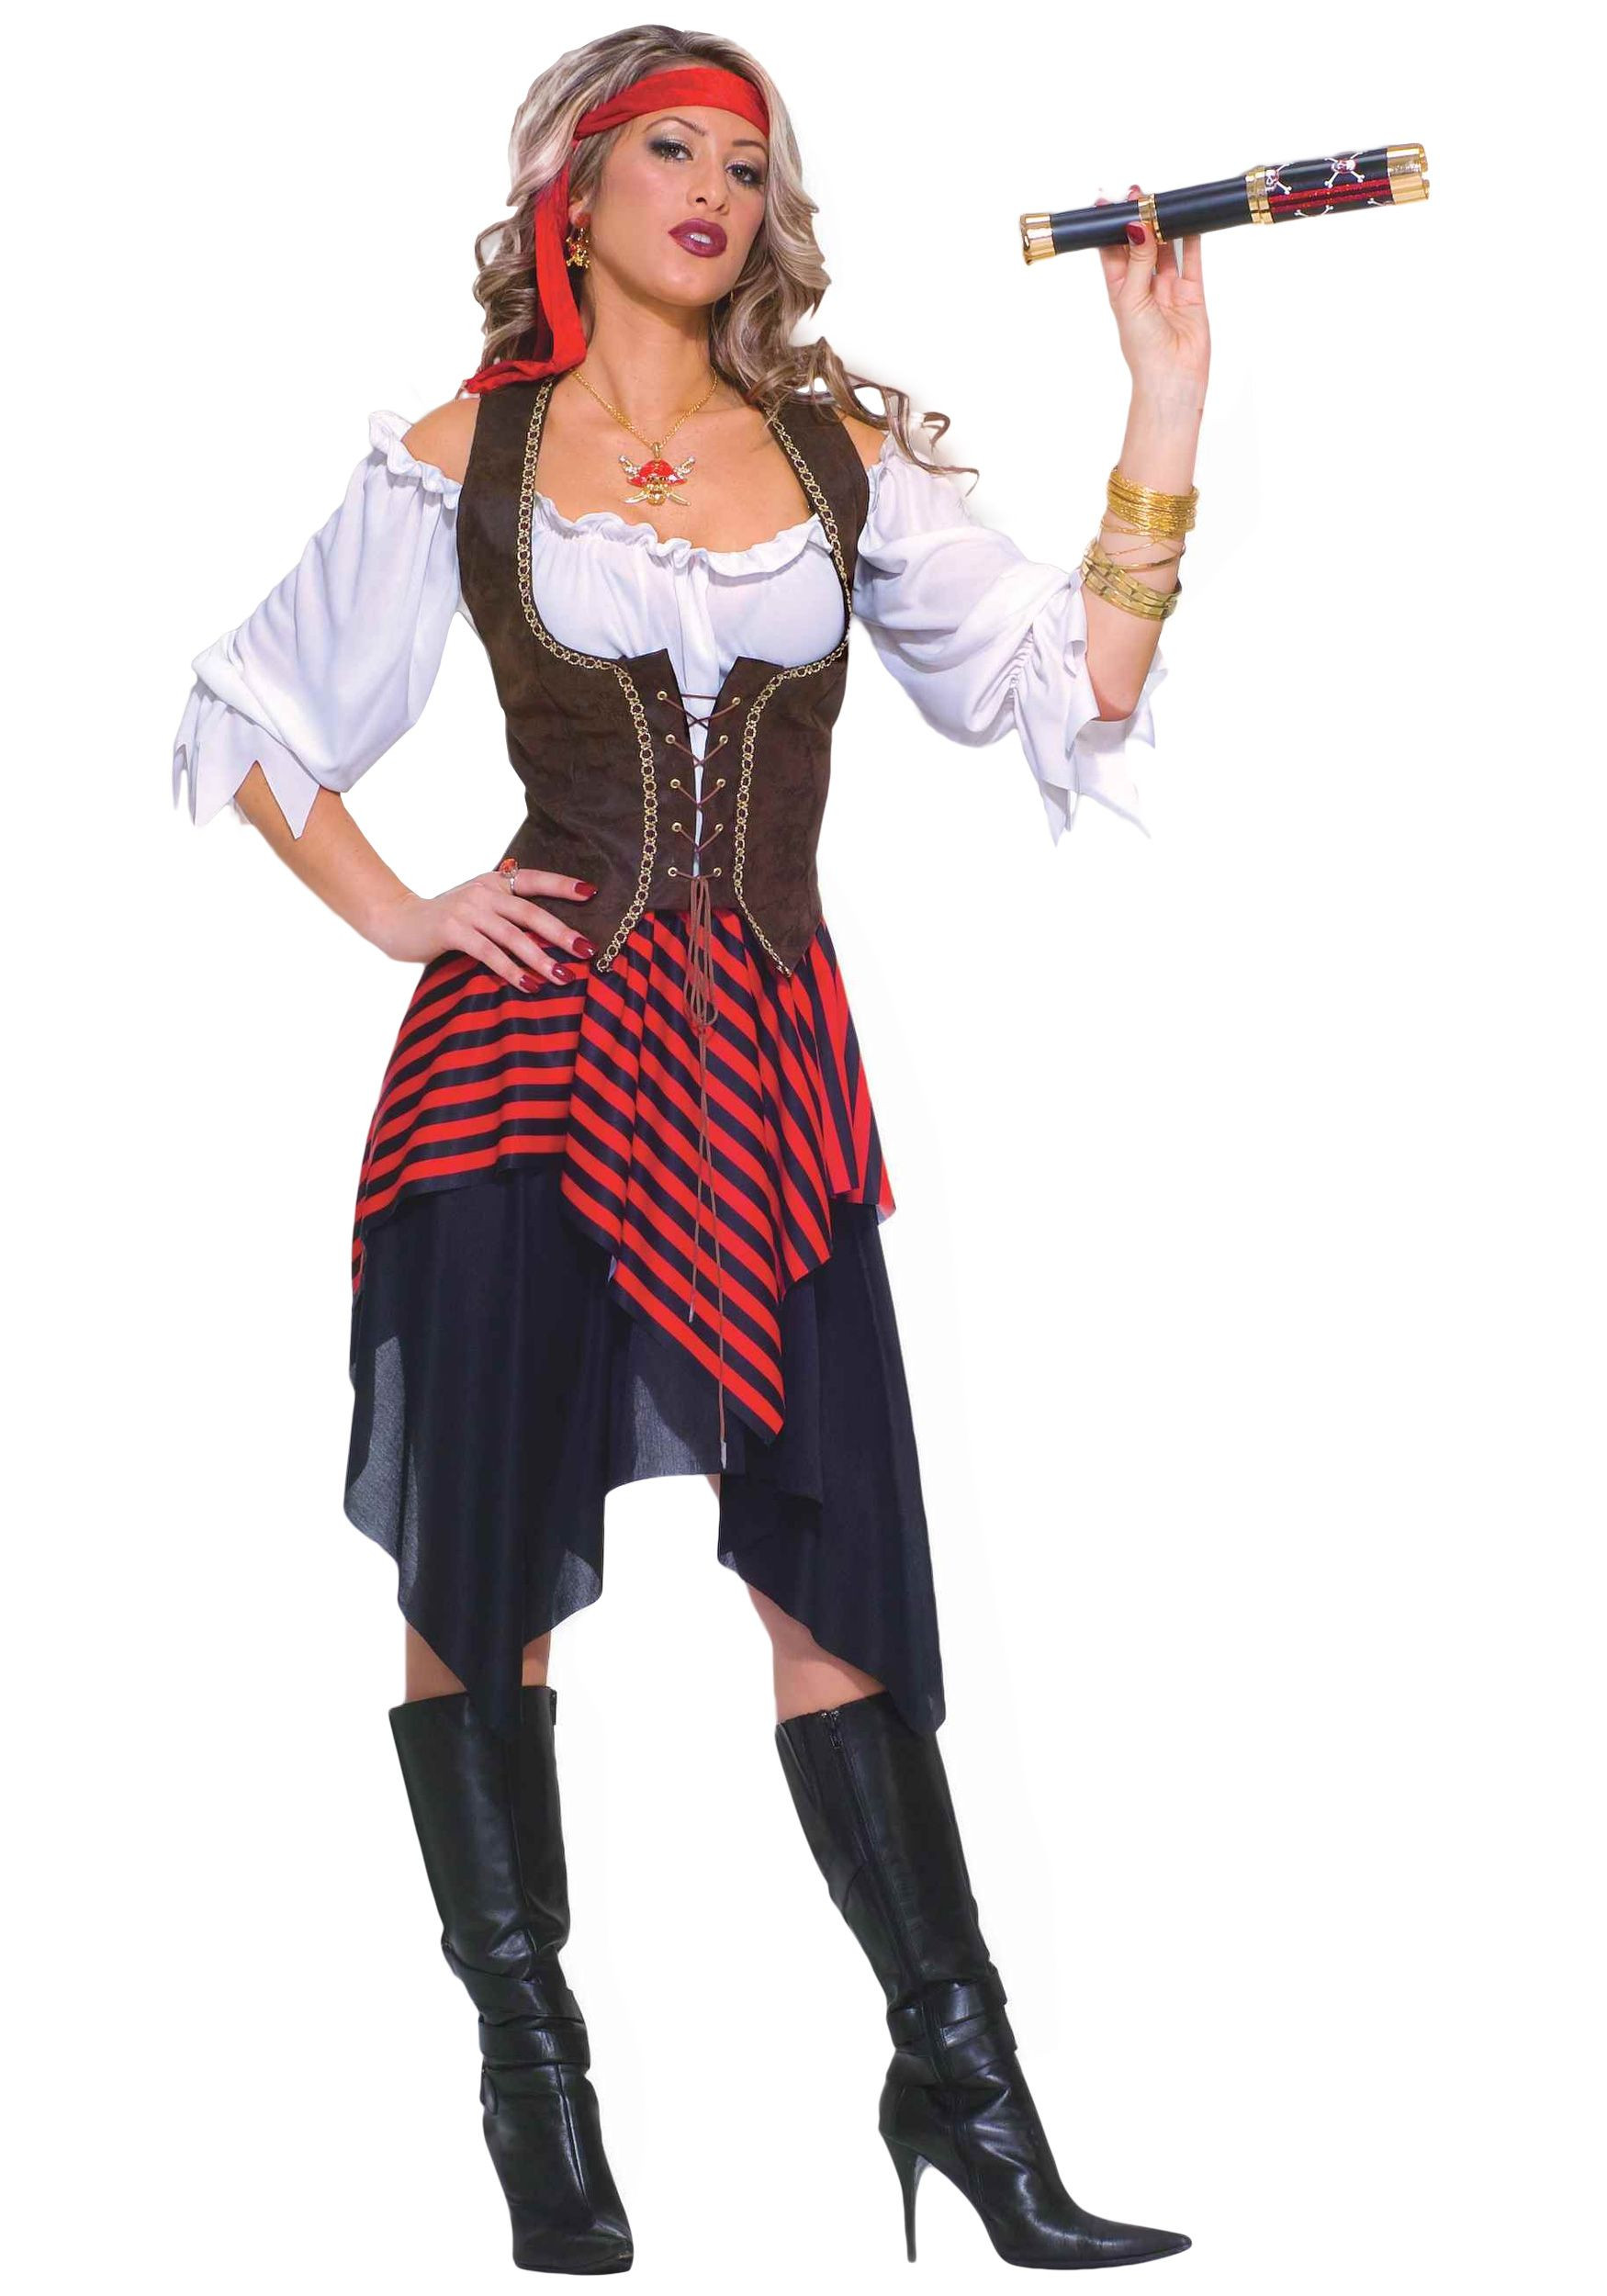 DIY Pirate Costume For Adults
 Sweet Bucaneer Costume Plus a sword and hat I think